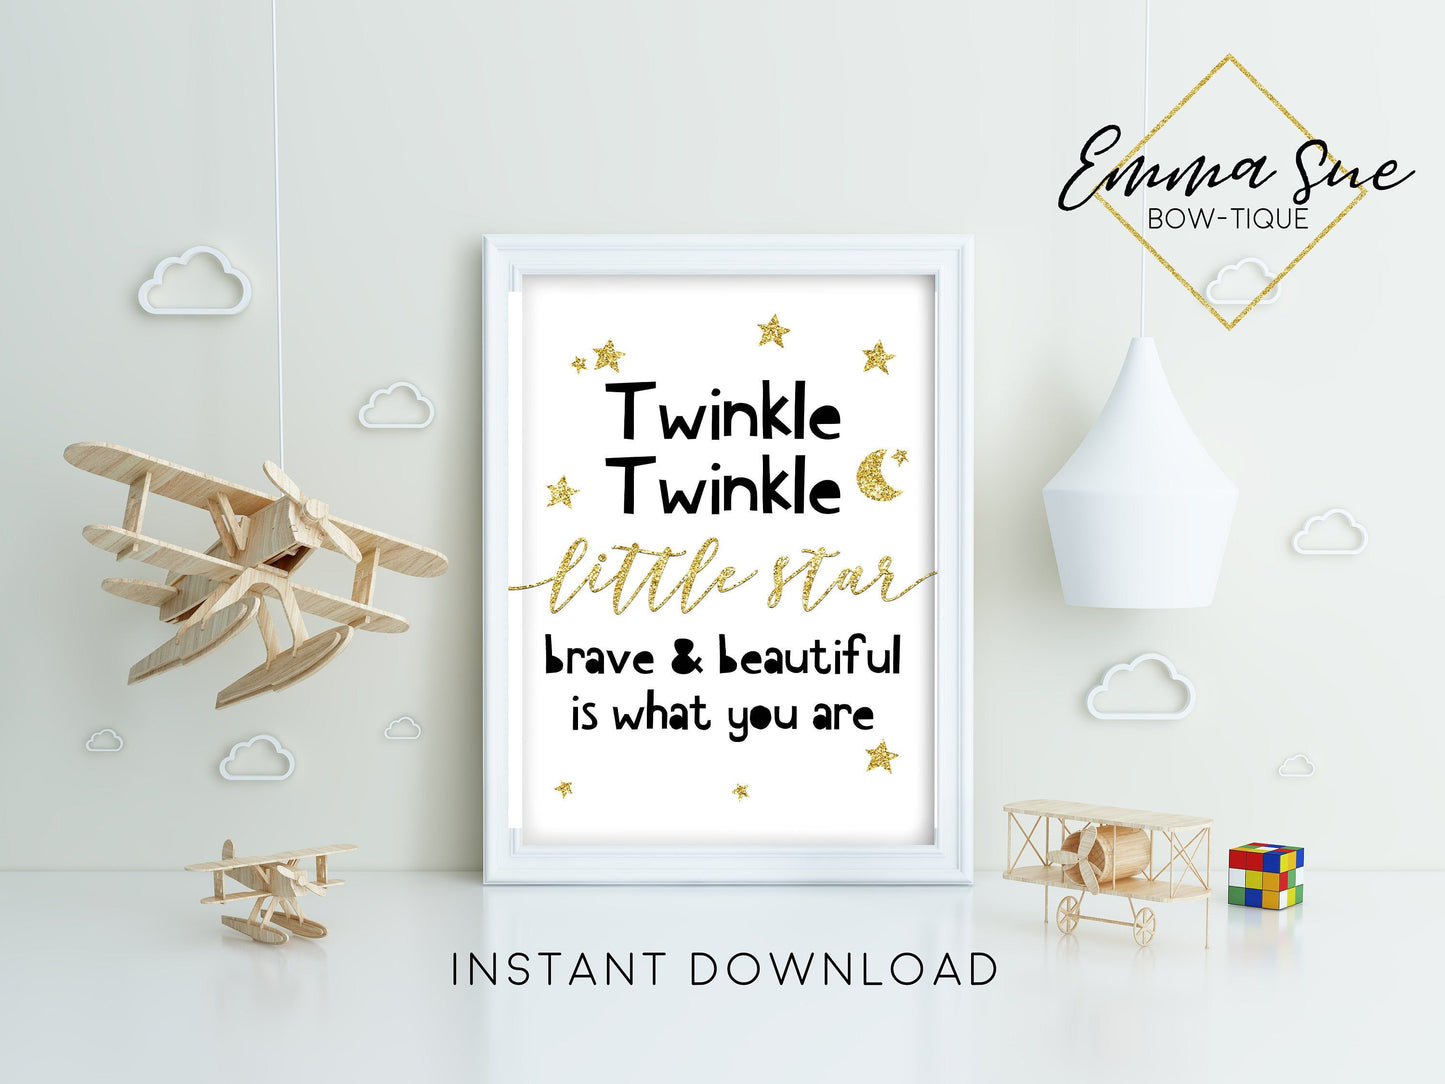 Twinkle Twinkle Little Star Brave & Beautiful is what you are - Girl's Nursery room Wall Art Printable Sign - Digital File